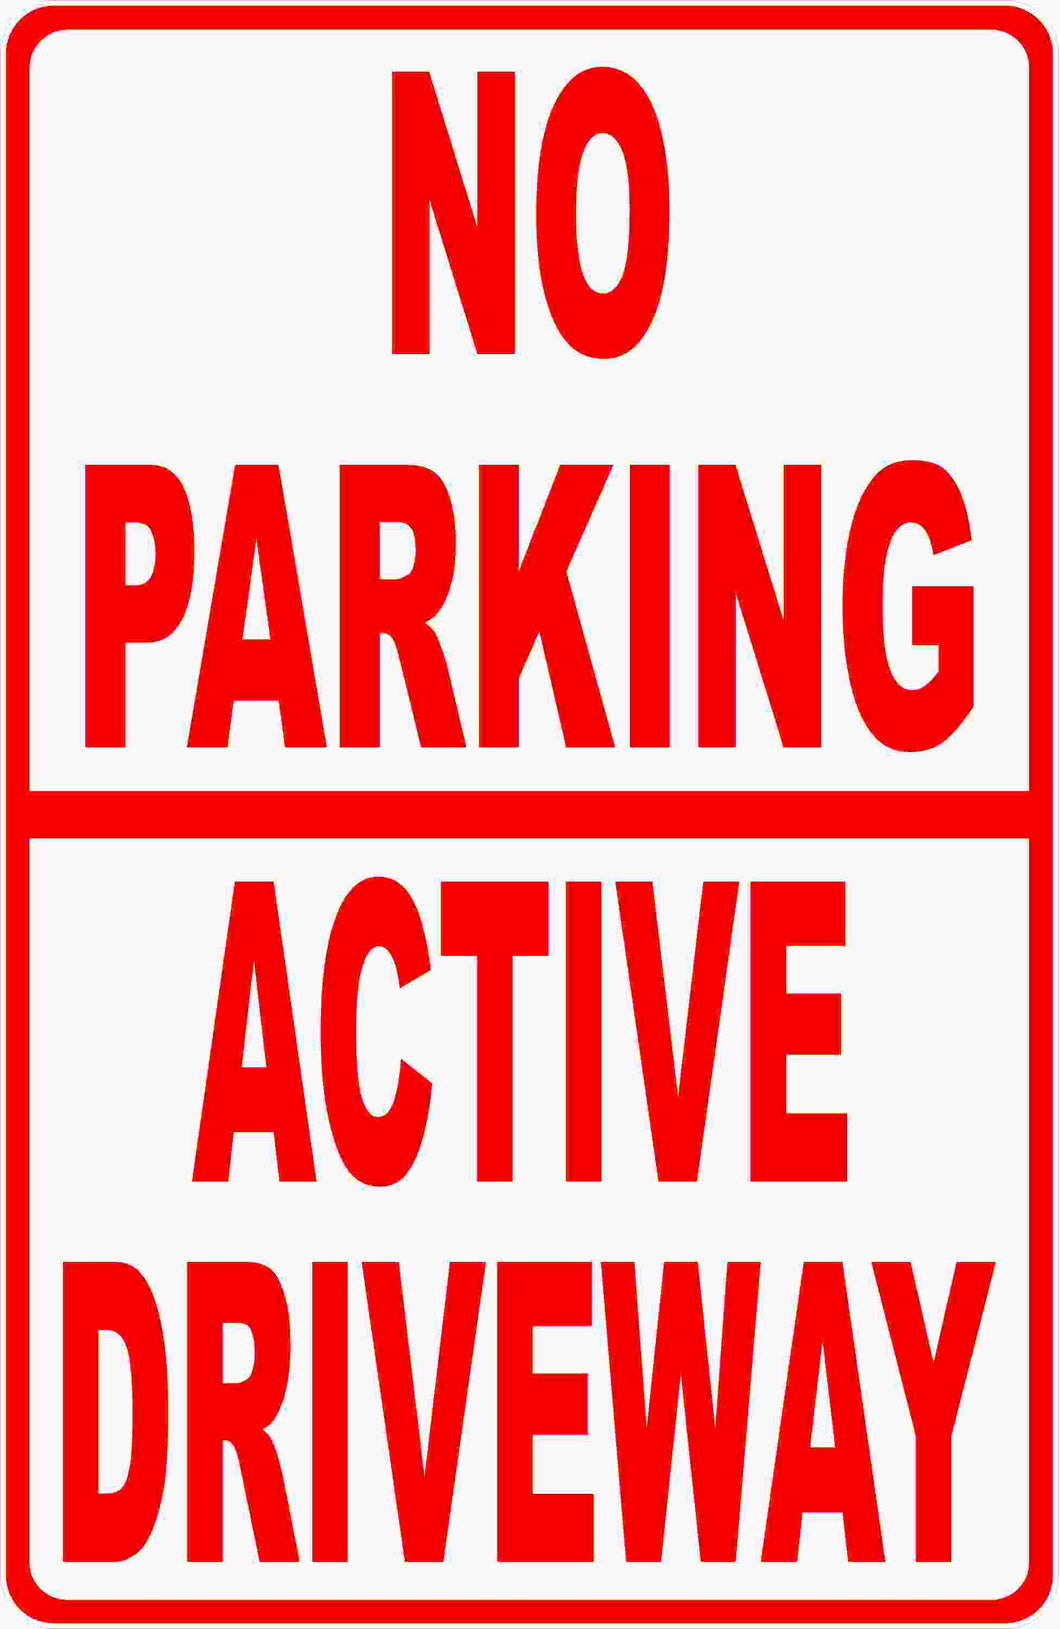 No Parking Active Driveway Sign by Sala Graphics